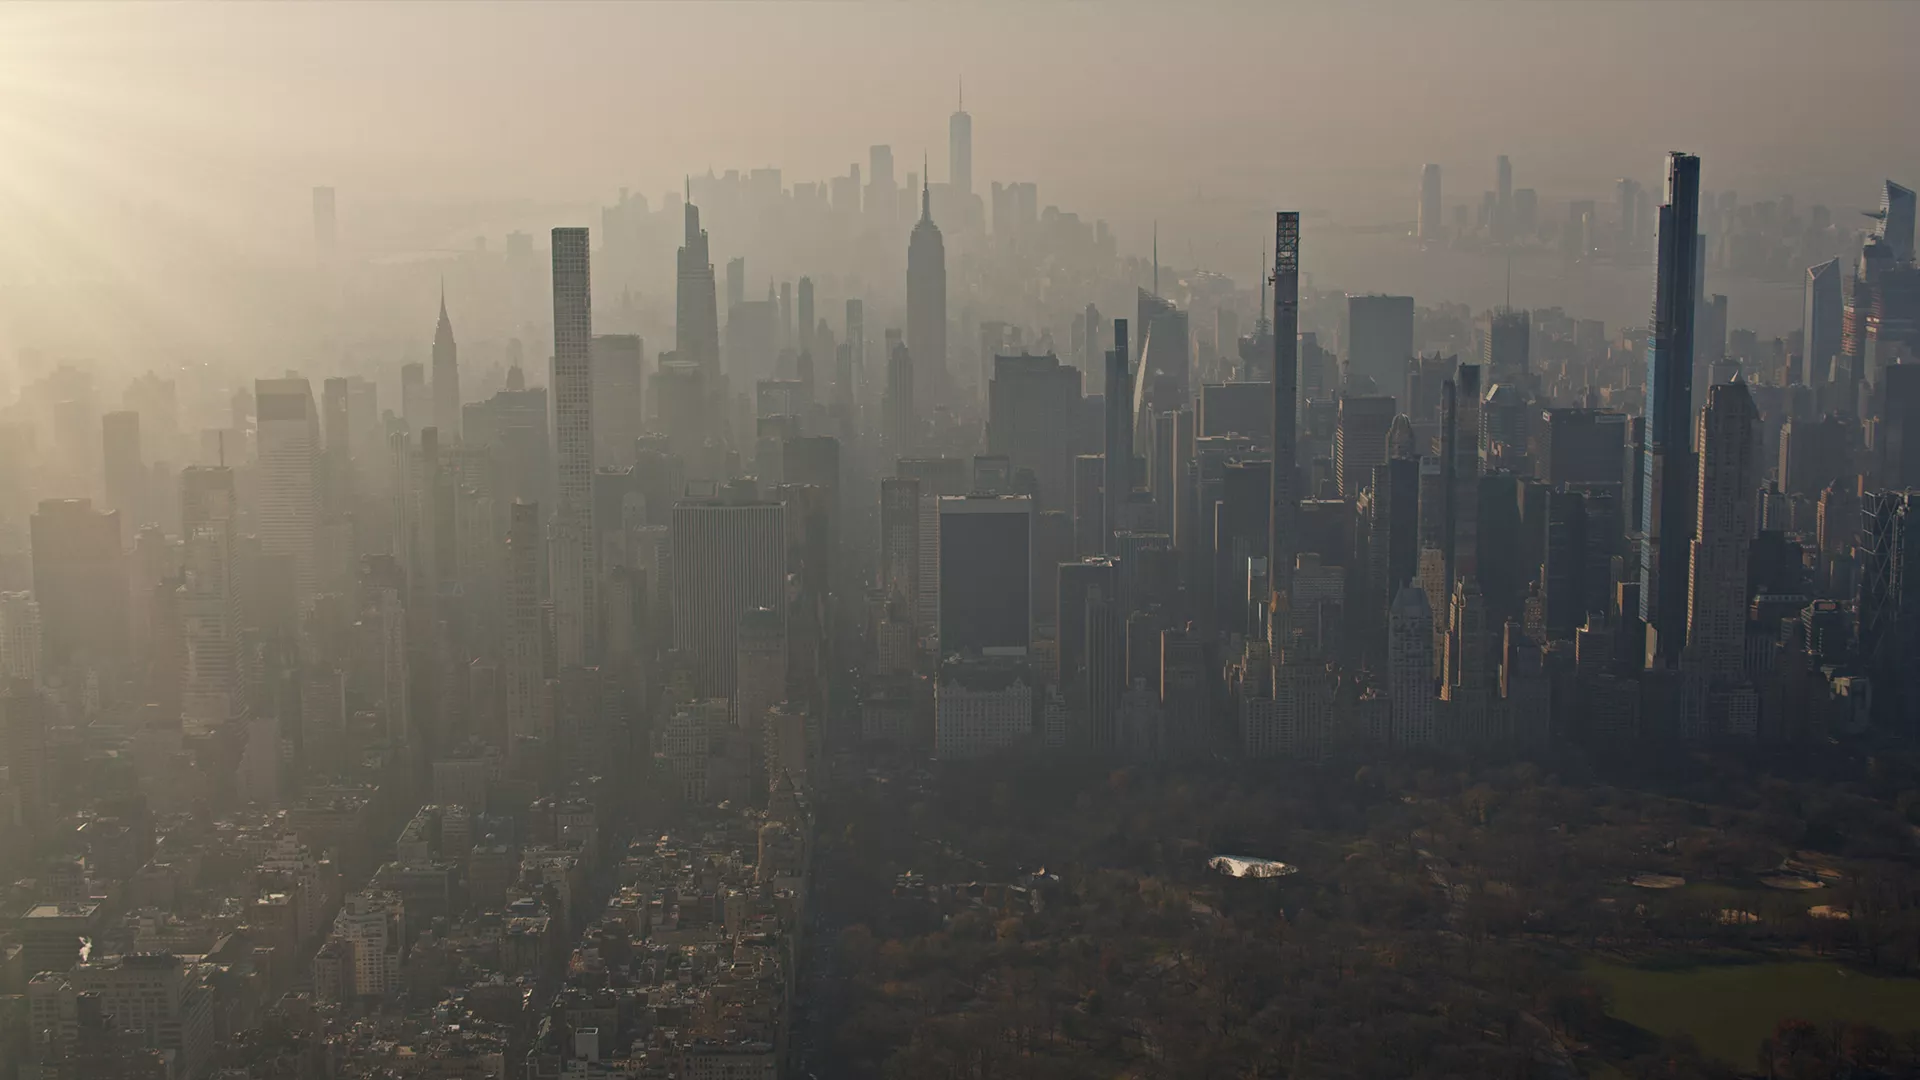 image of a city skyline with a lot of smog and pollution making it hard to see.